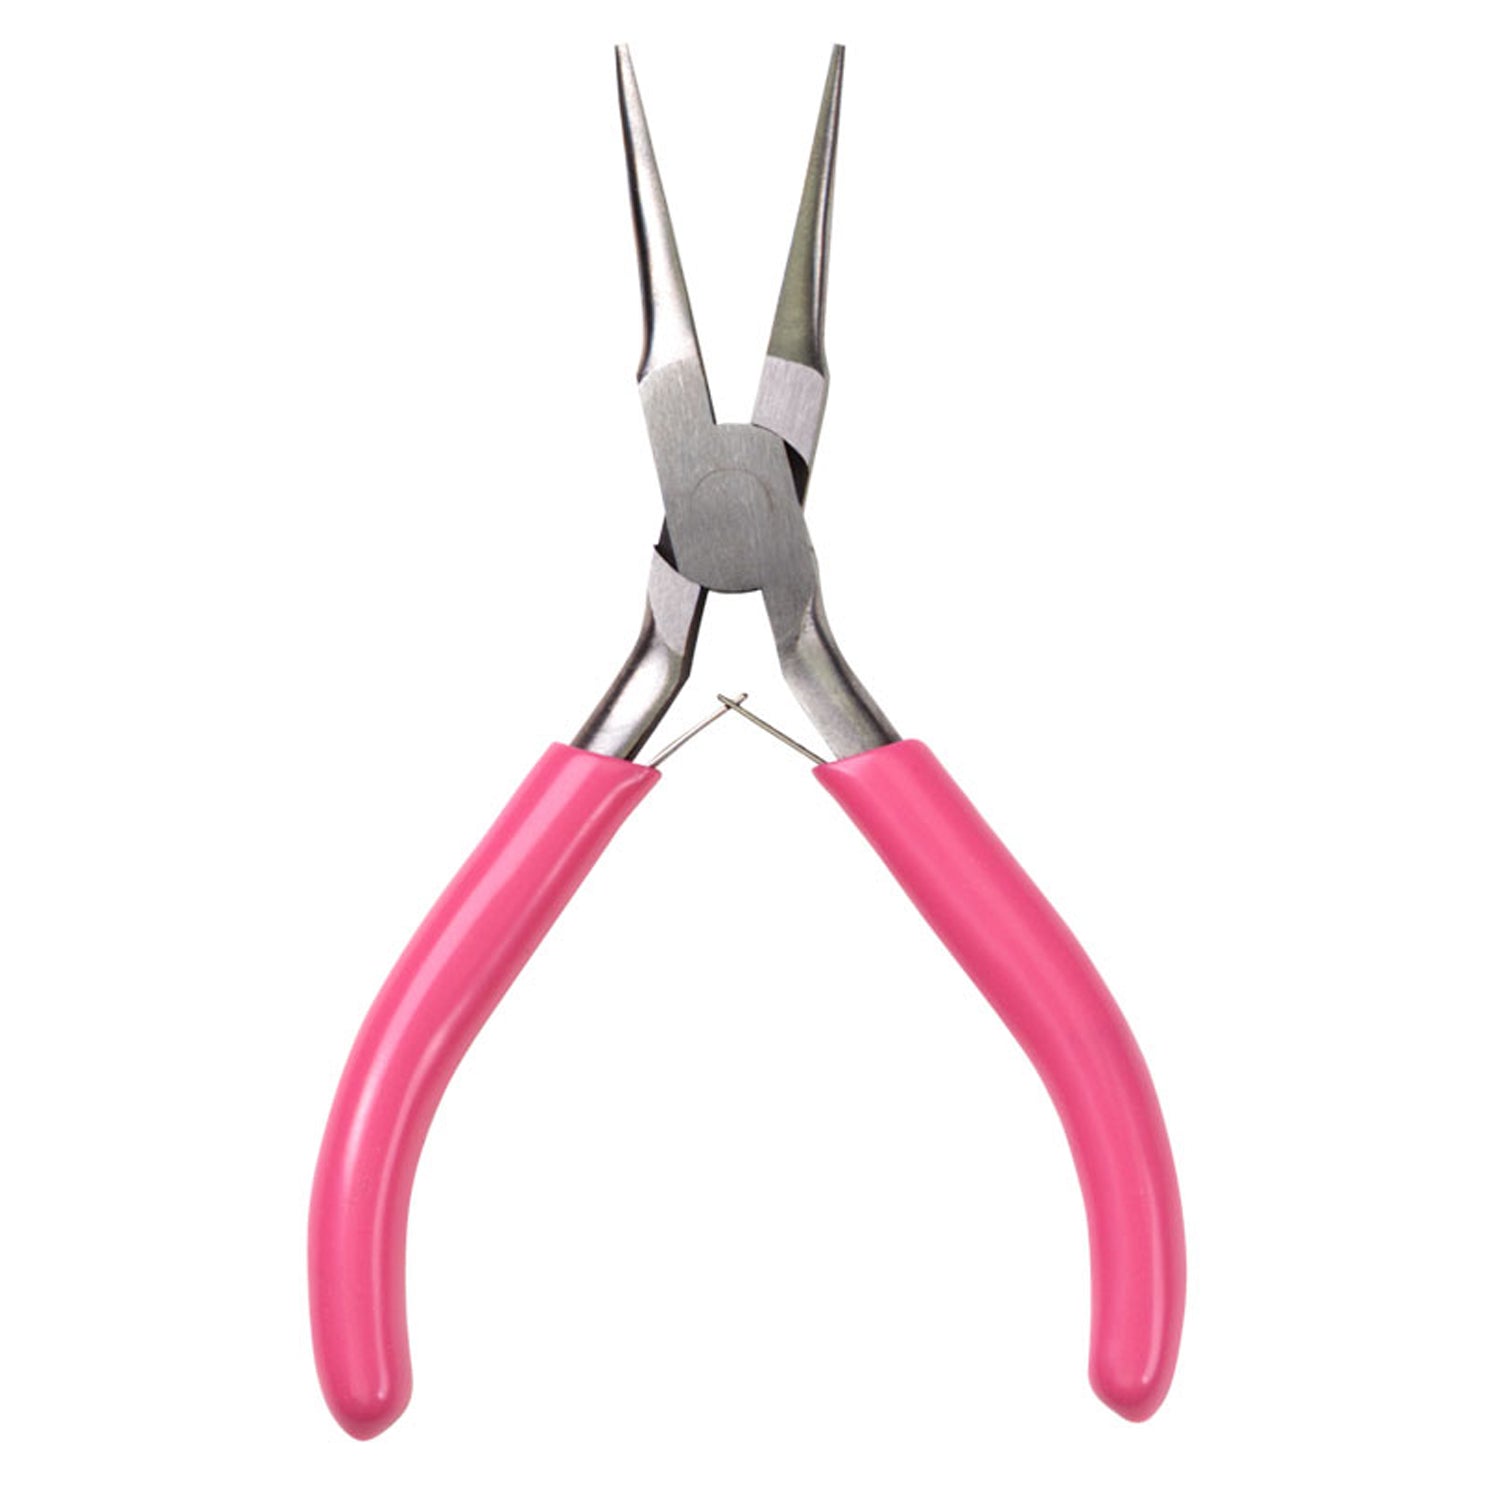 Round Nose Pliers Jewelry Making Tools, Beading Tools 